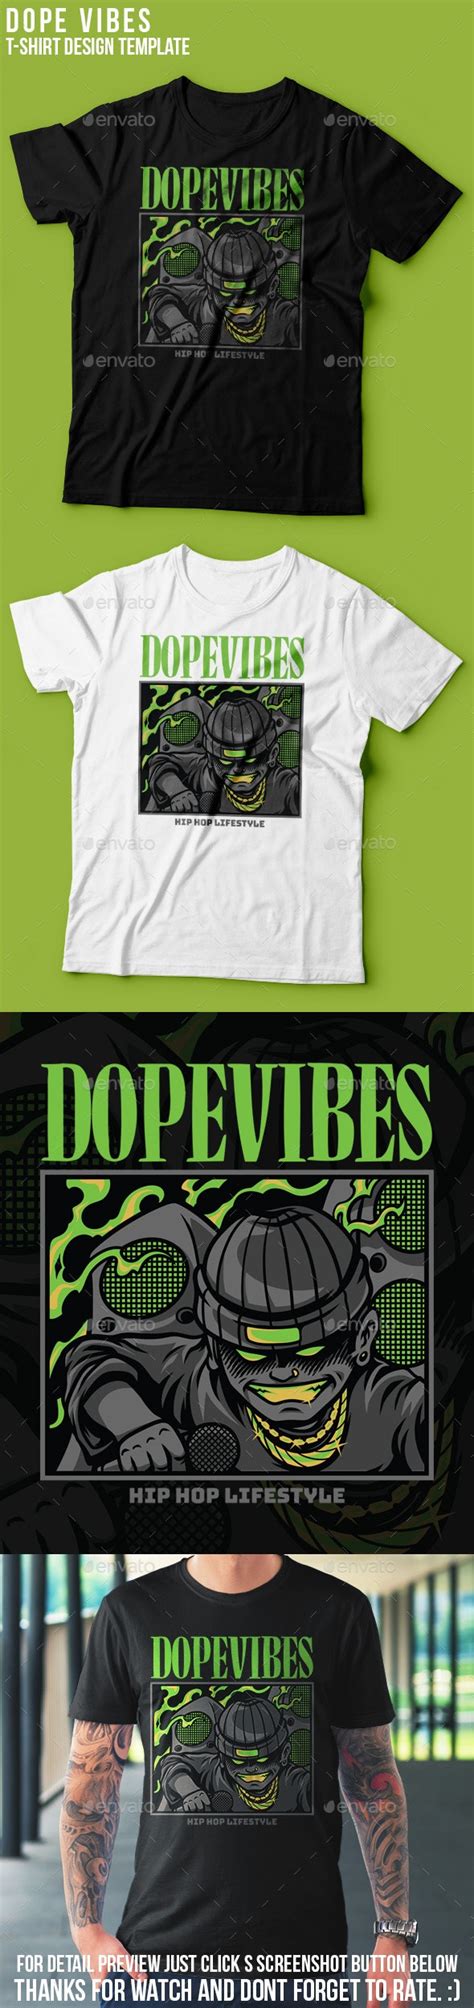 Dope Vibes T Shirt Design By Badsyxn Graphicriver